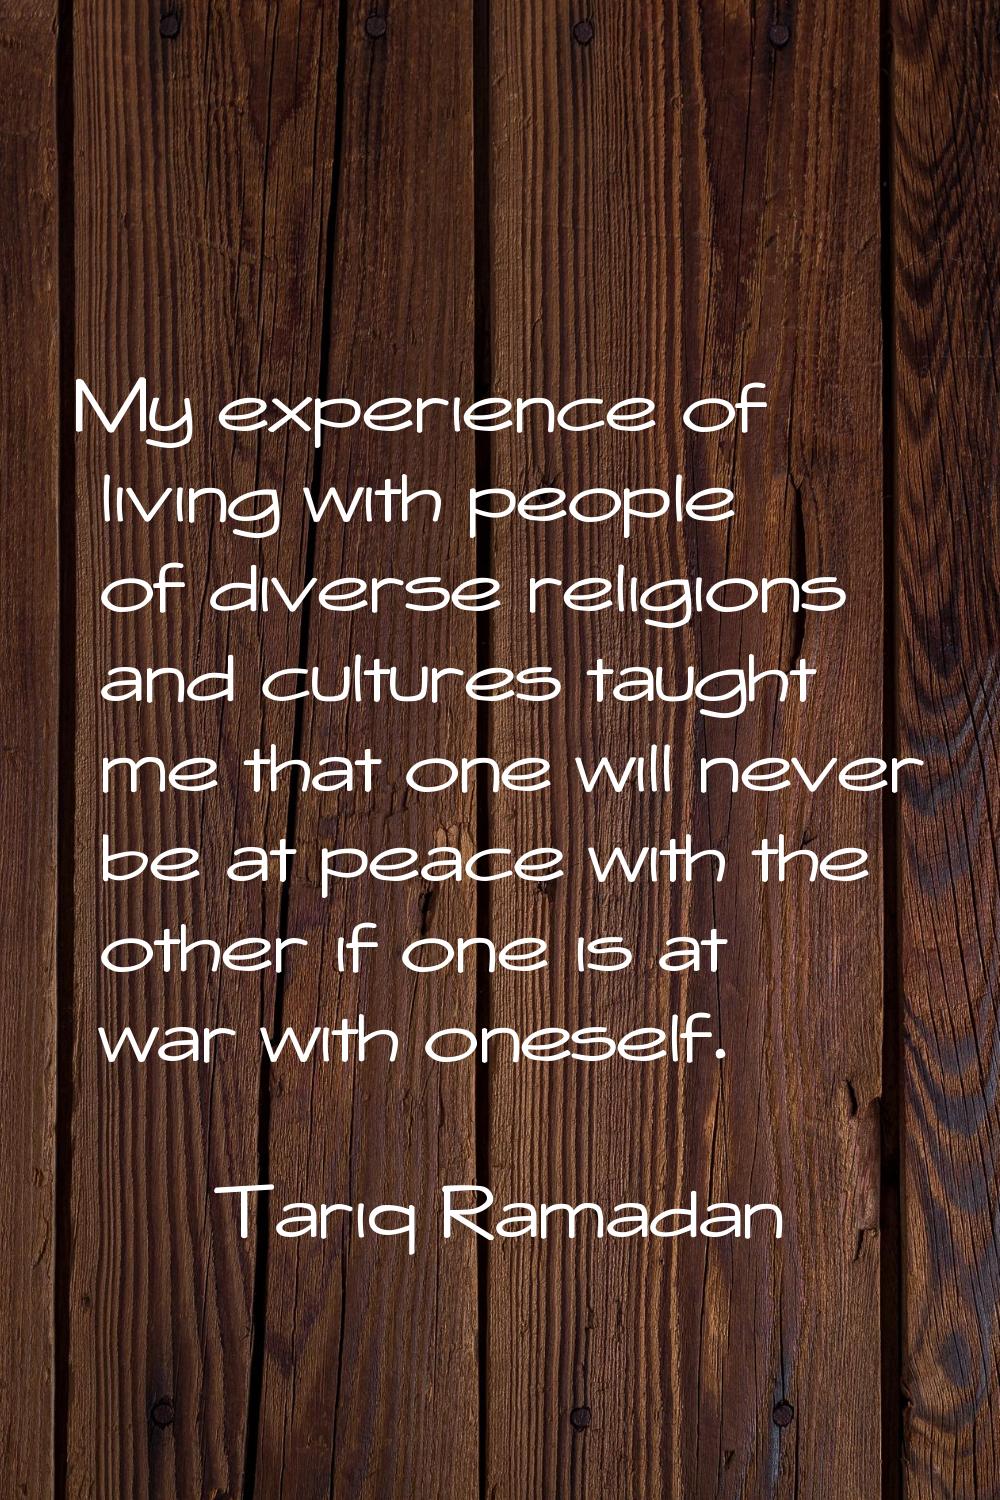 My experience of living with people of diverse religions and cultures taught me that one will never